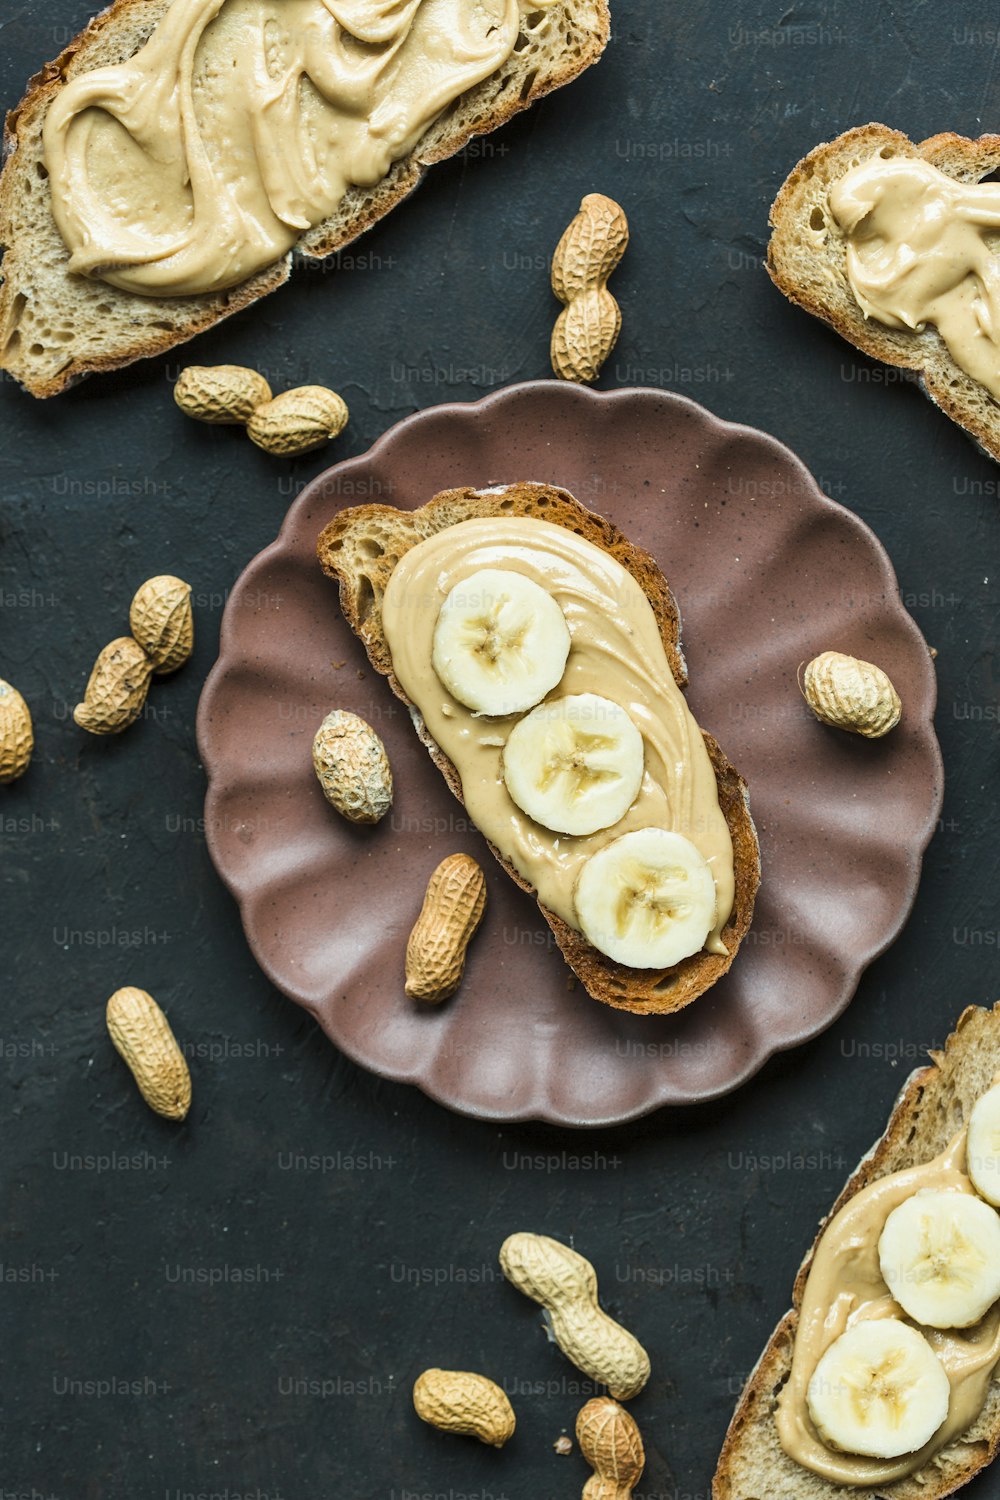 a peanut butter and banana sandwich on a plate